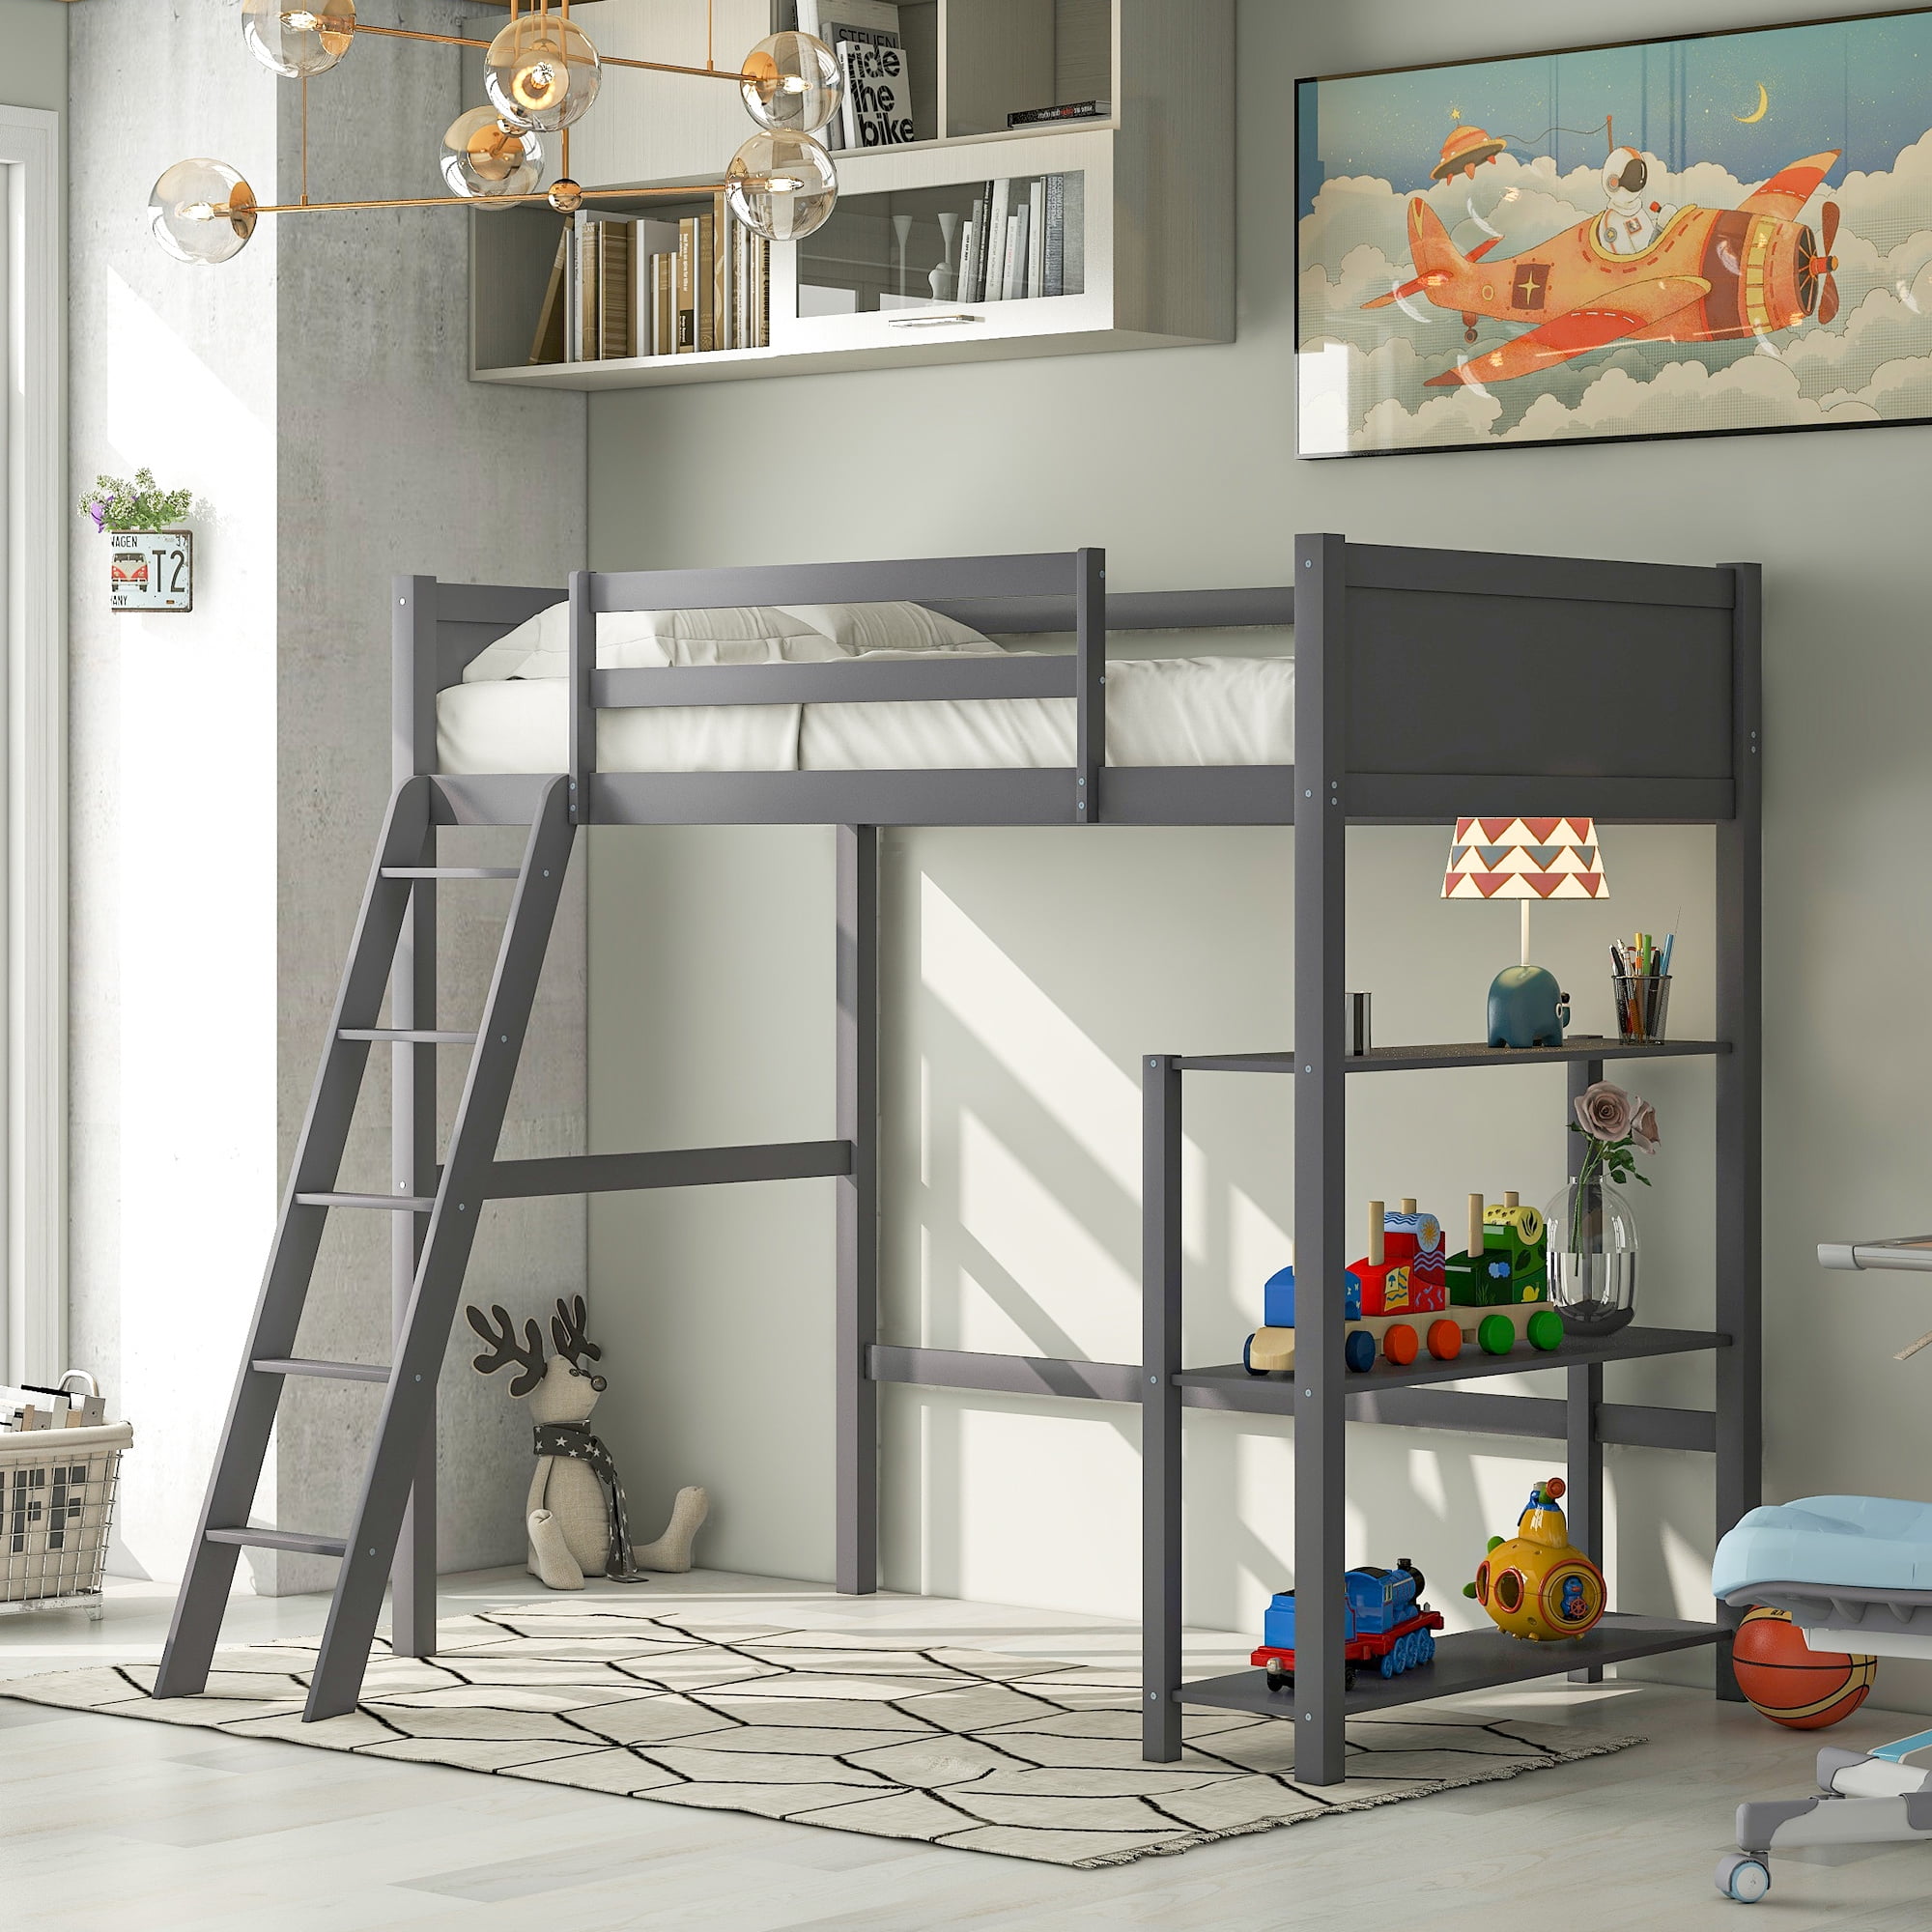 Twin Size Loft Storage Bed Frame For Kids Teens Girls Boys With Storage Shelves 